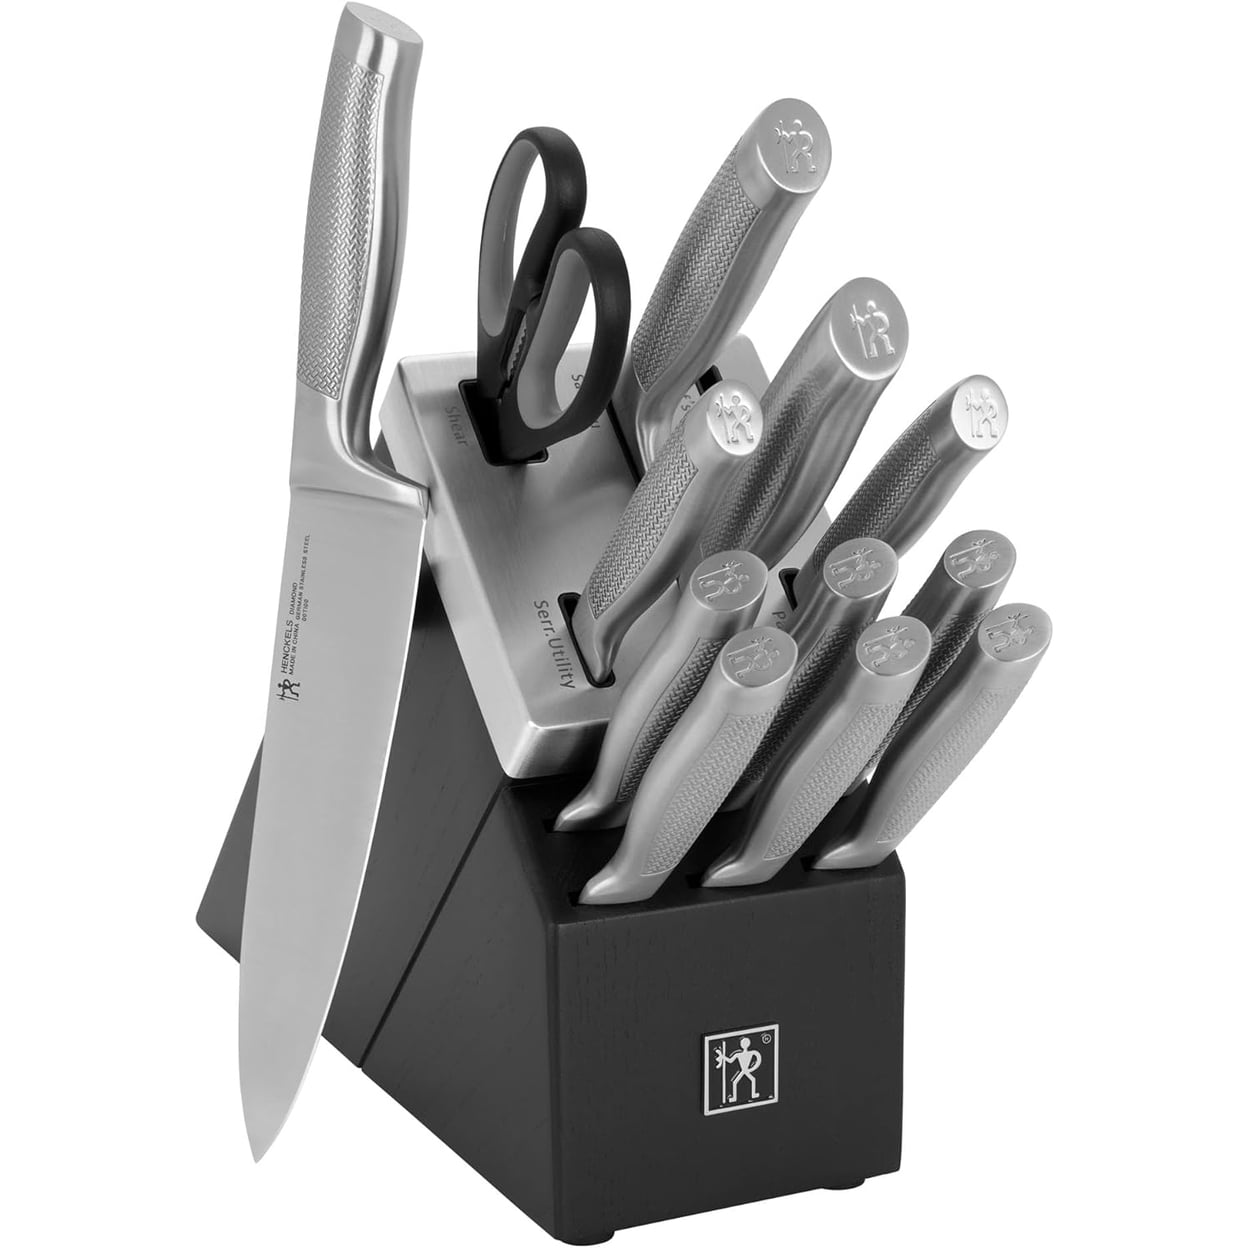 Chicago Cutlery Insignia Steel 13 Piece Block Set 1135027 - The Home Depot